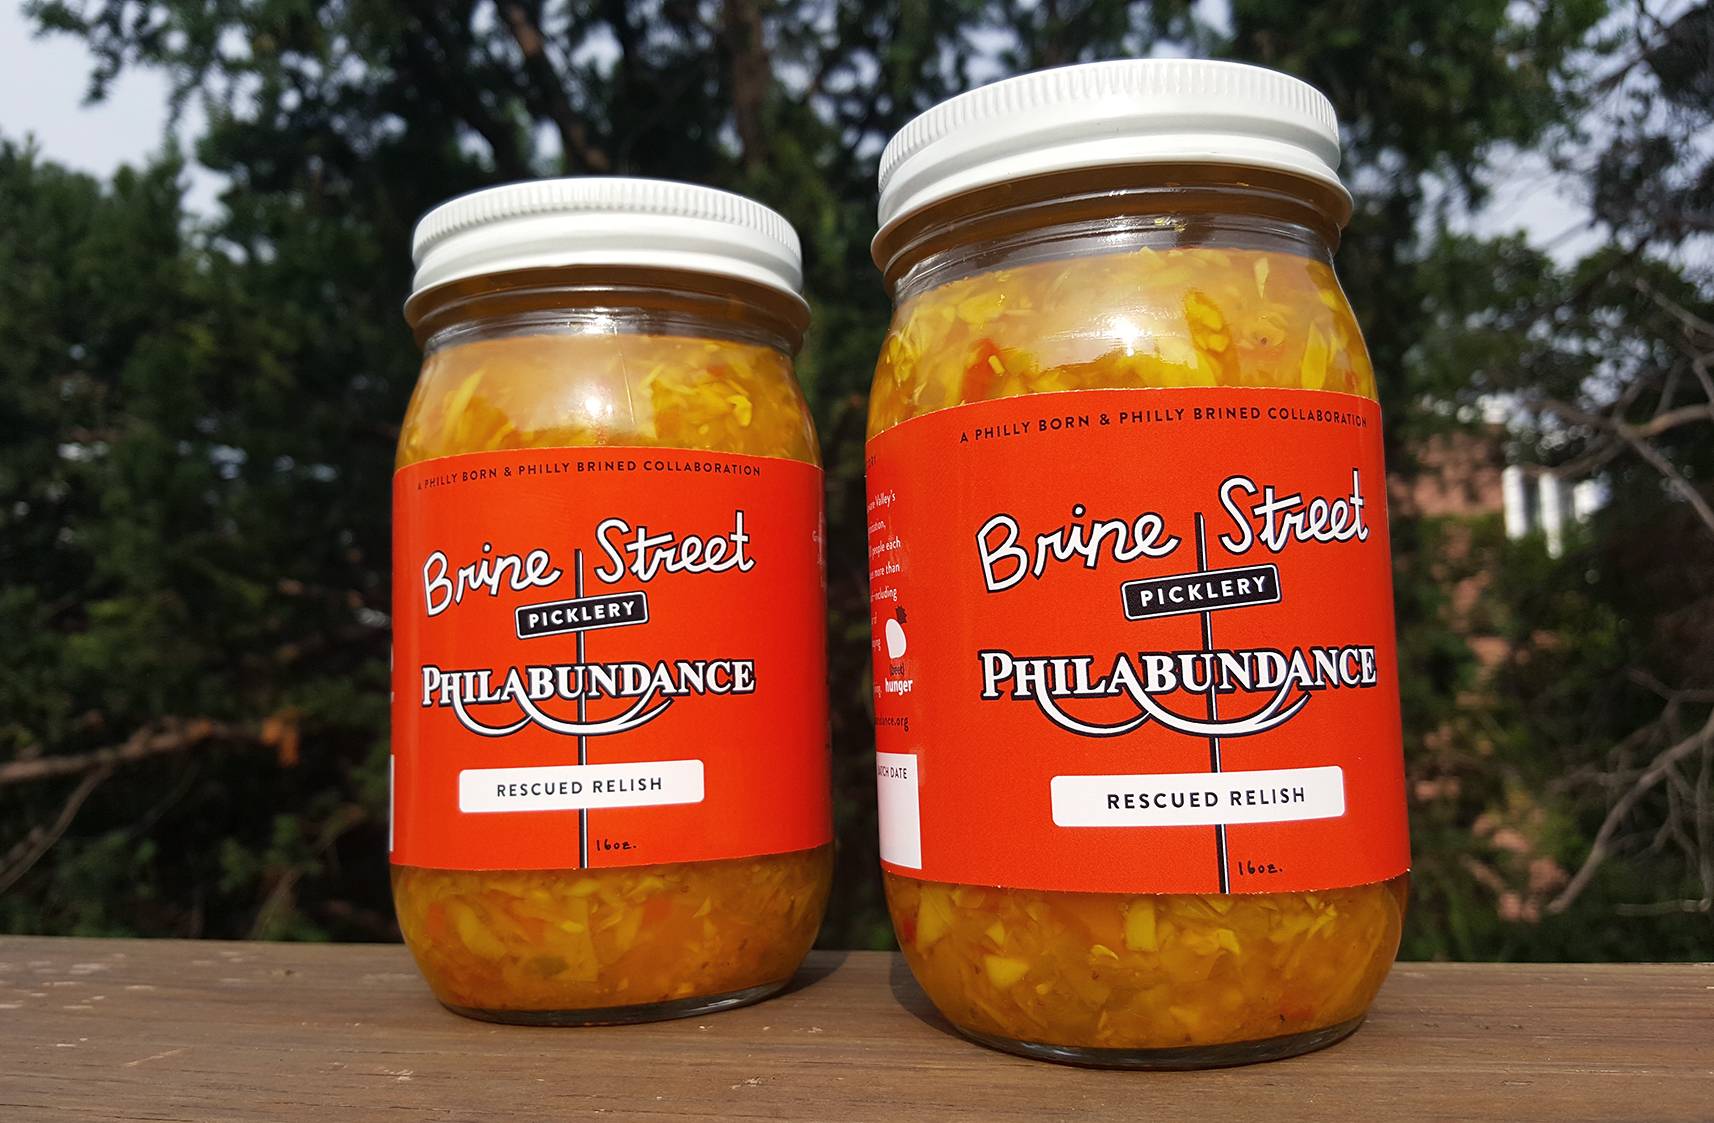 Rescued Relish is an anything-goes condiment made from excess produce that Philabundance, a Philadelphia anti-hunger organization, can't move. The relish is modeled on a Pennsylvania Dutch chowchow recipe — a tangy mix of sweet, spicy and sour flavors.